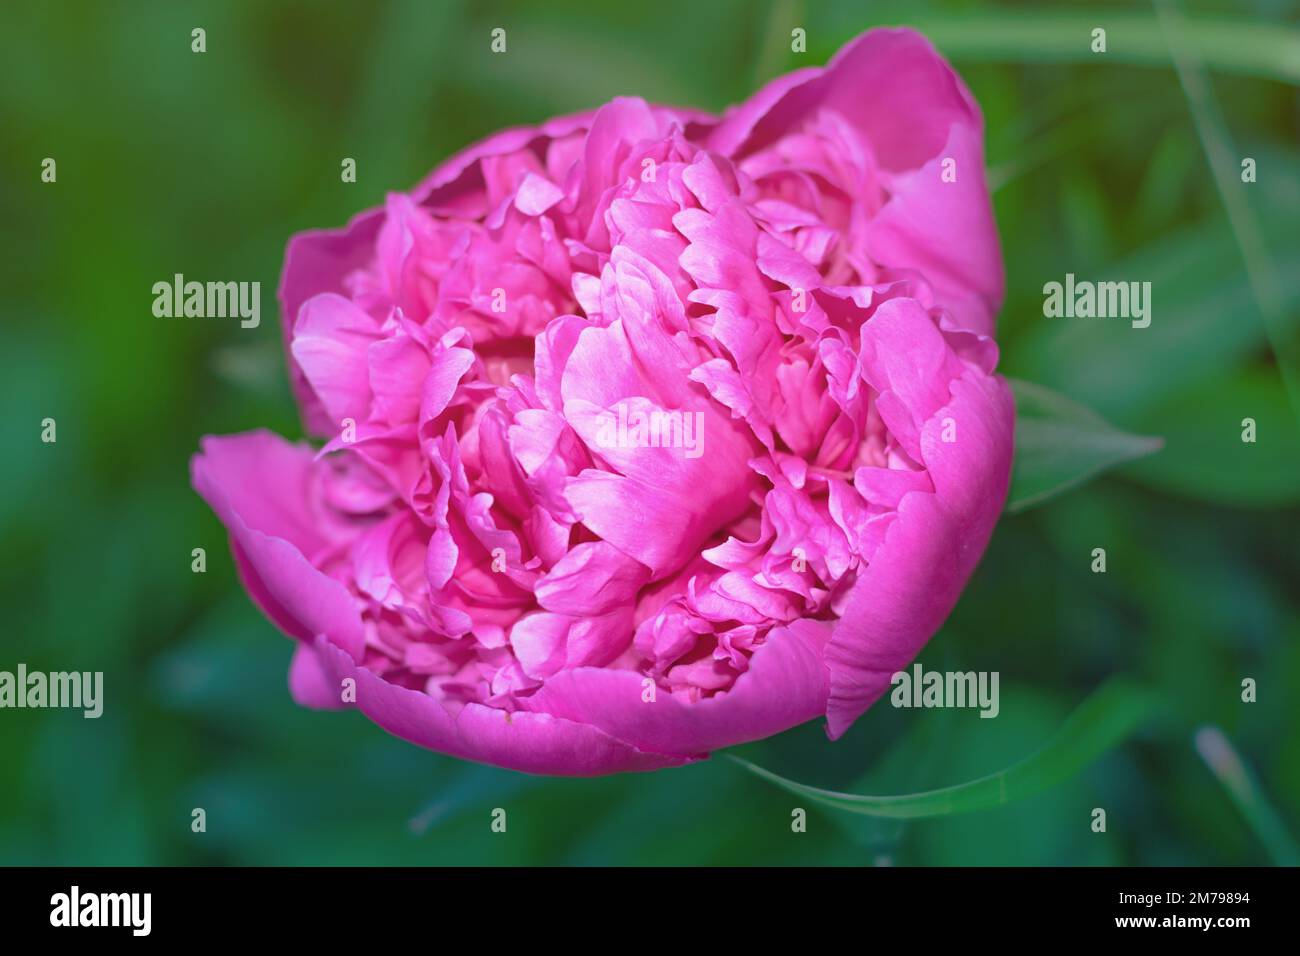 A beautiful blooming peony in a close-up photo with a blurred background Stock Photo